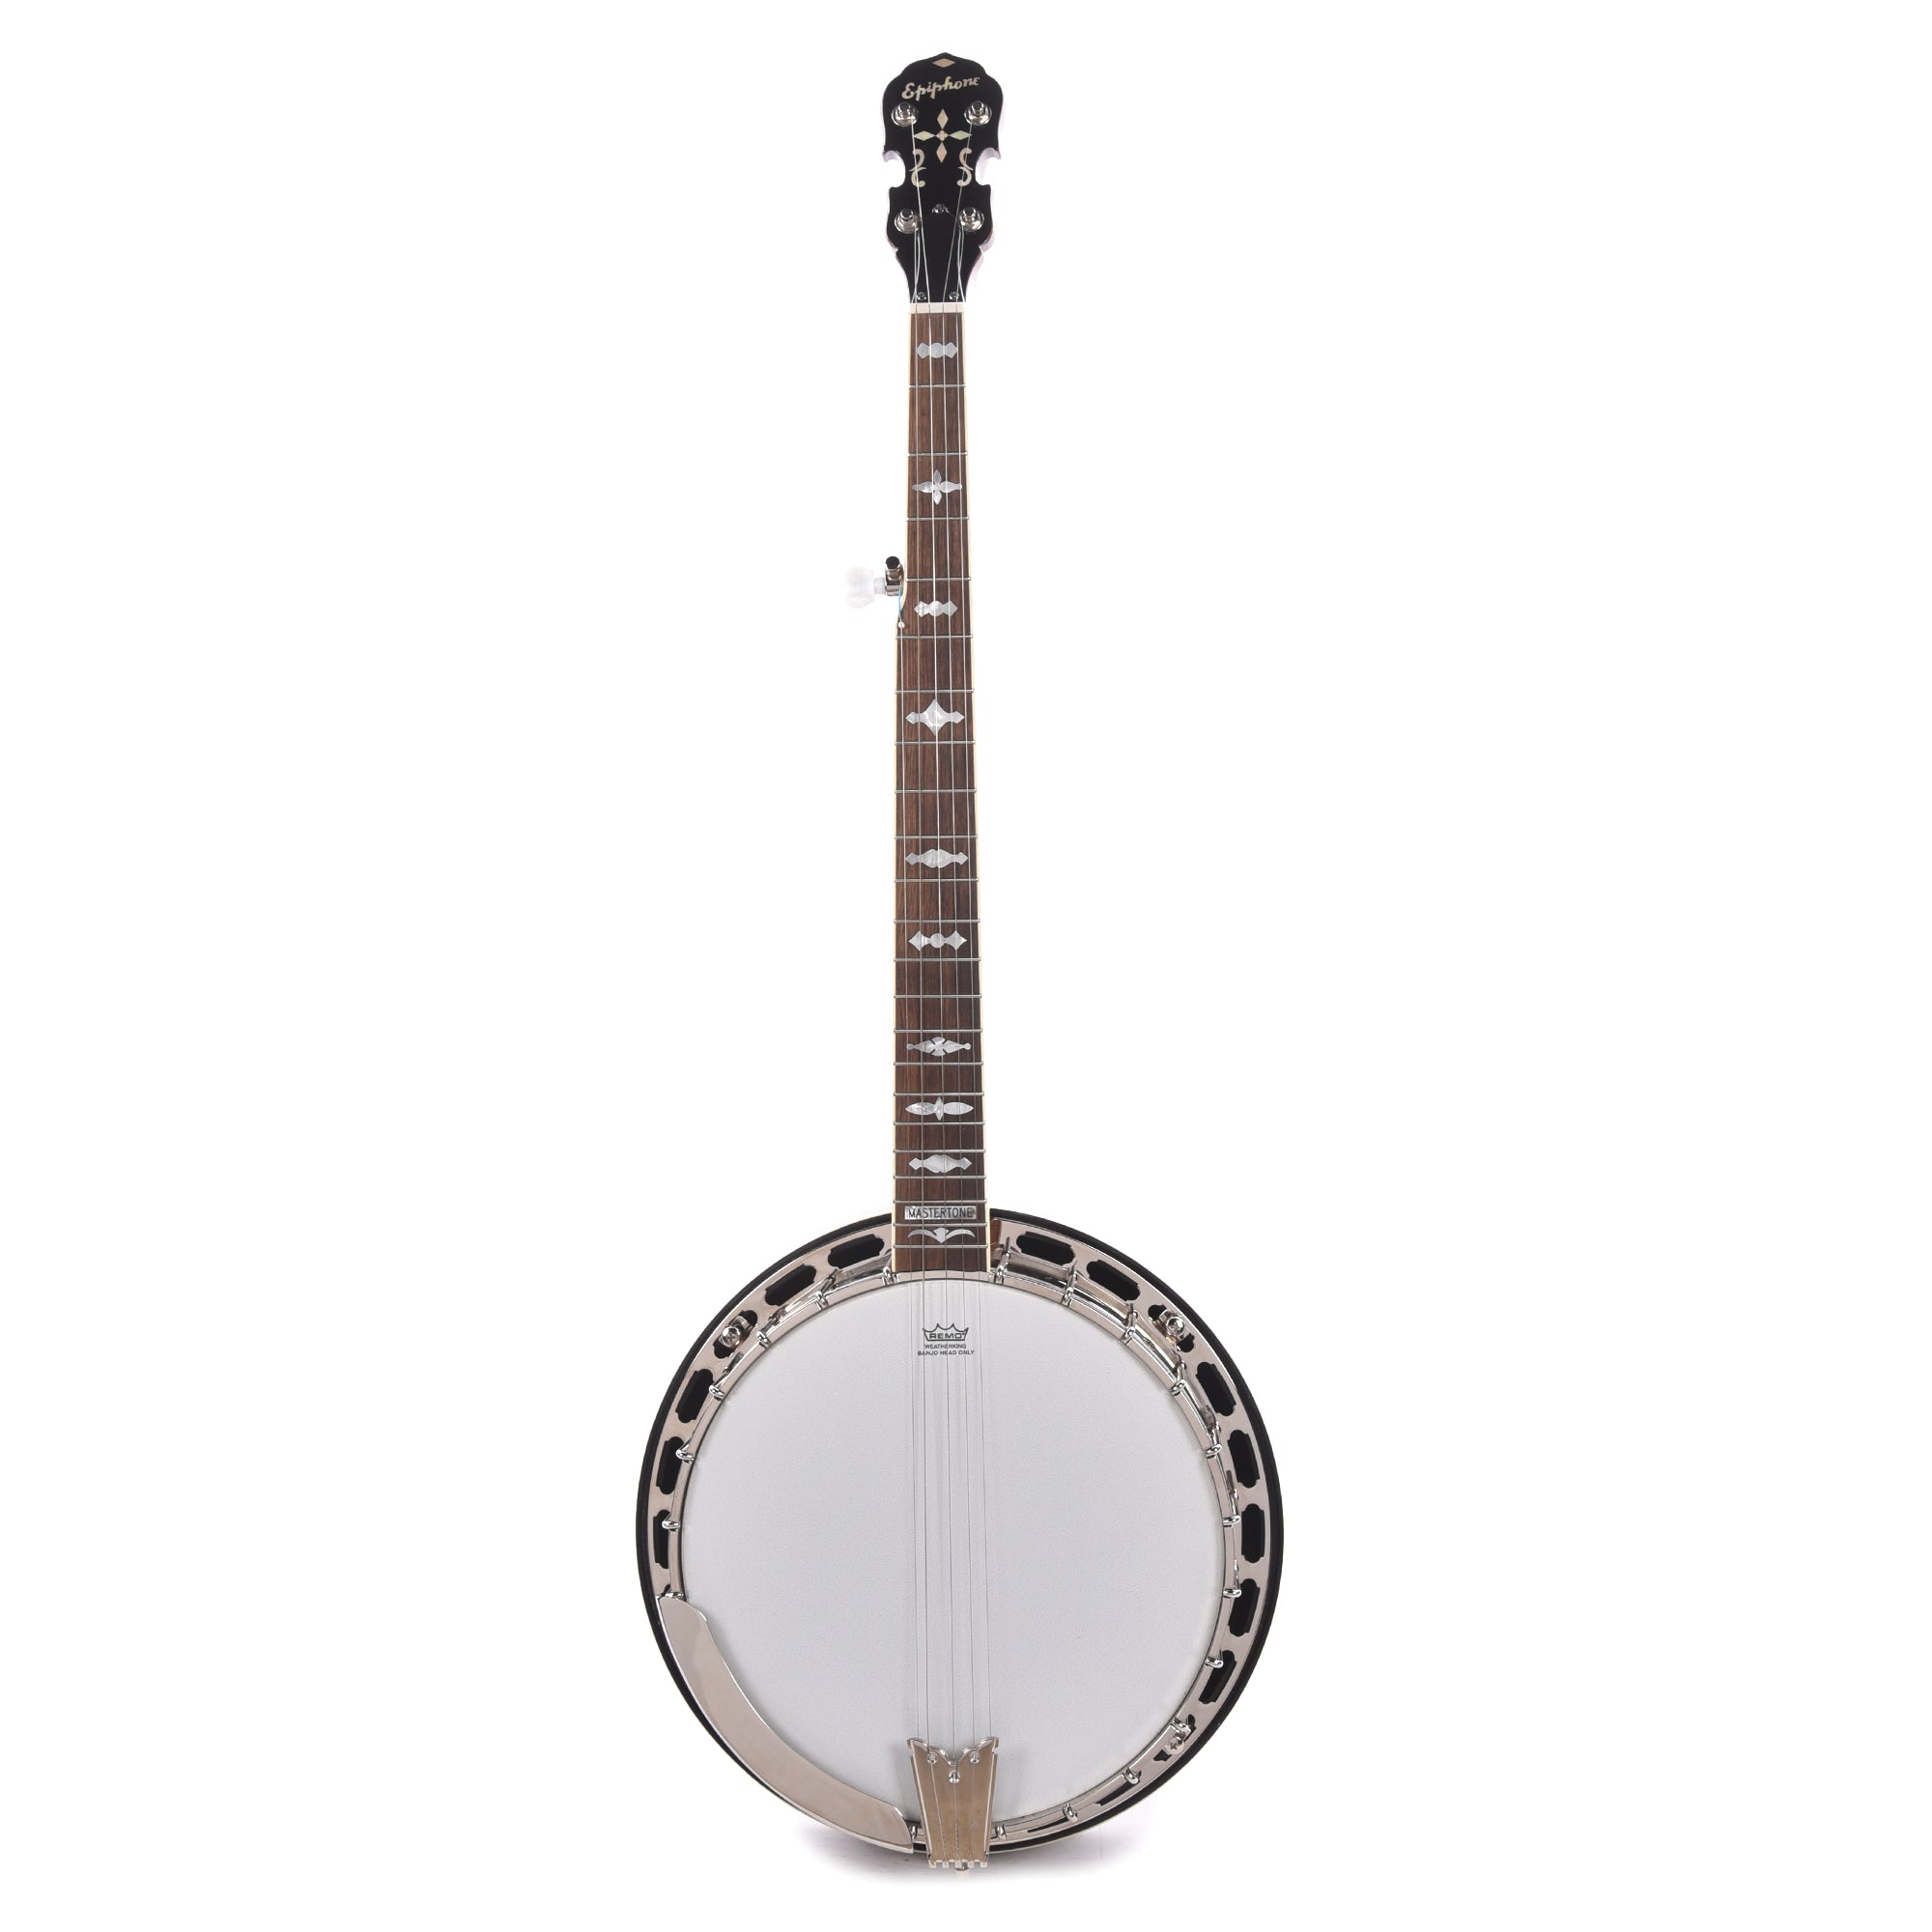 Epiphone Inspired by Gibson Mastertone Classic Banjo Natural